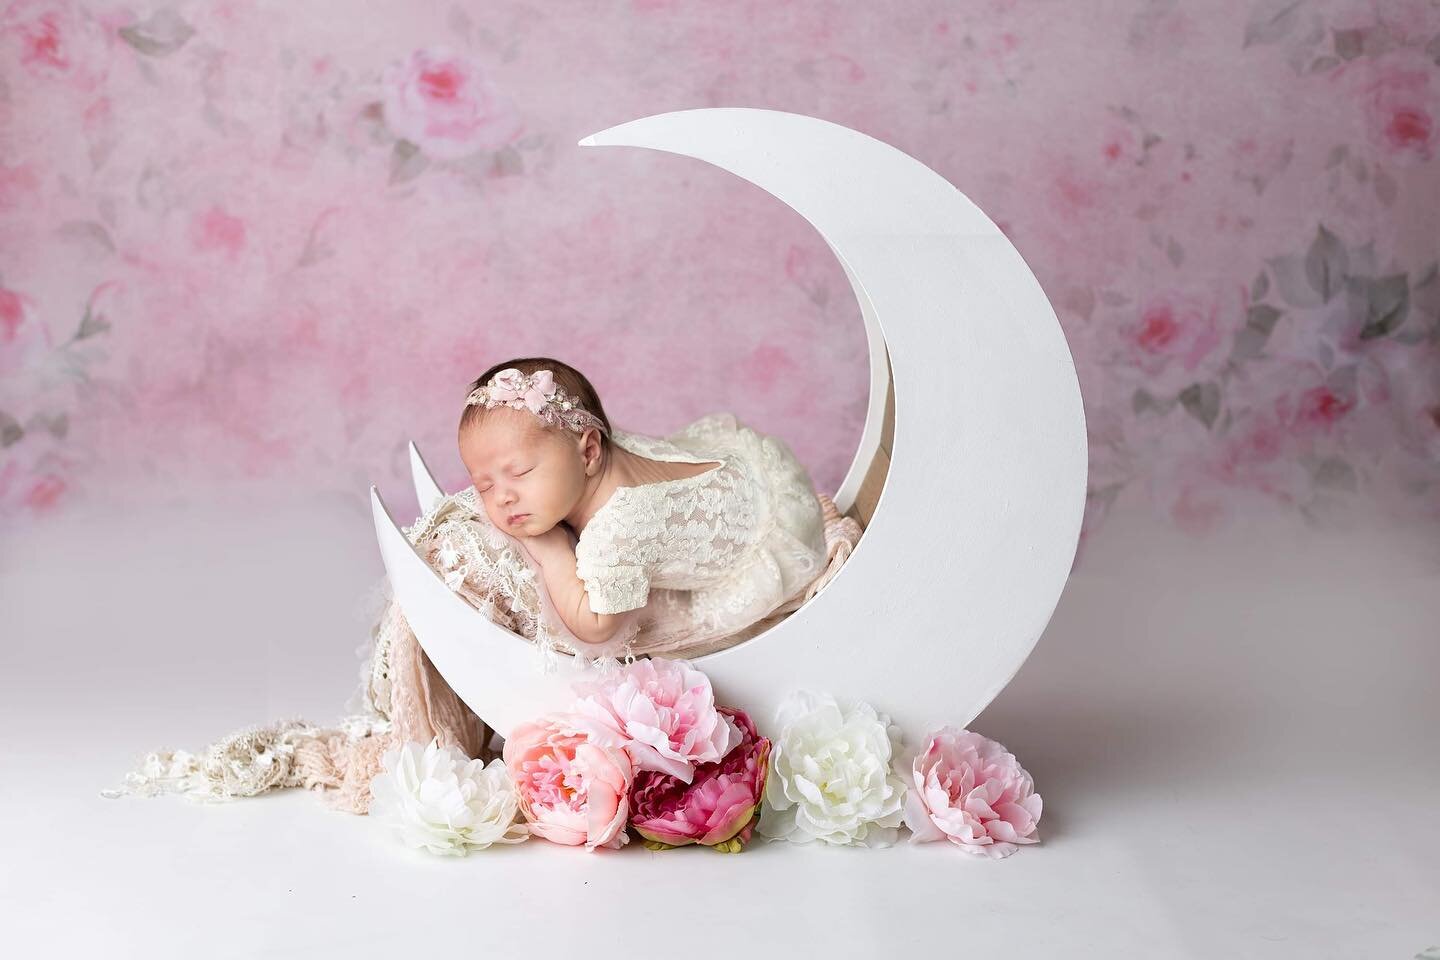 Sweets dreams, little one. Let&rsquo;s talk props!  I have been photographing newborns for 14 years and have been collecting beautiful props over the years. It&rsquo;s so fun to be able to style sessions using all of the pretty things in the studio.
